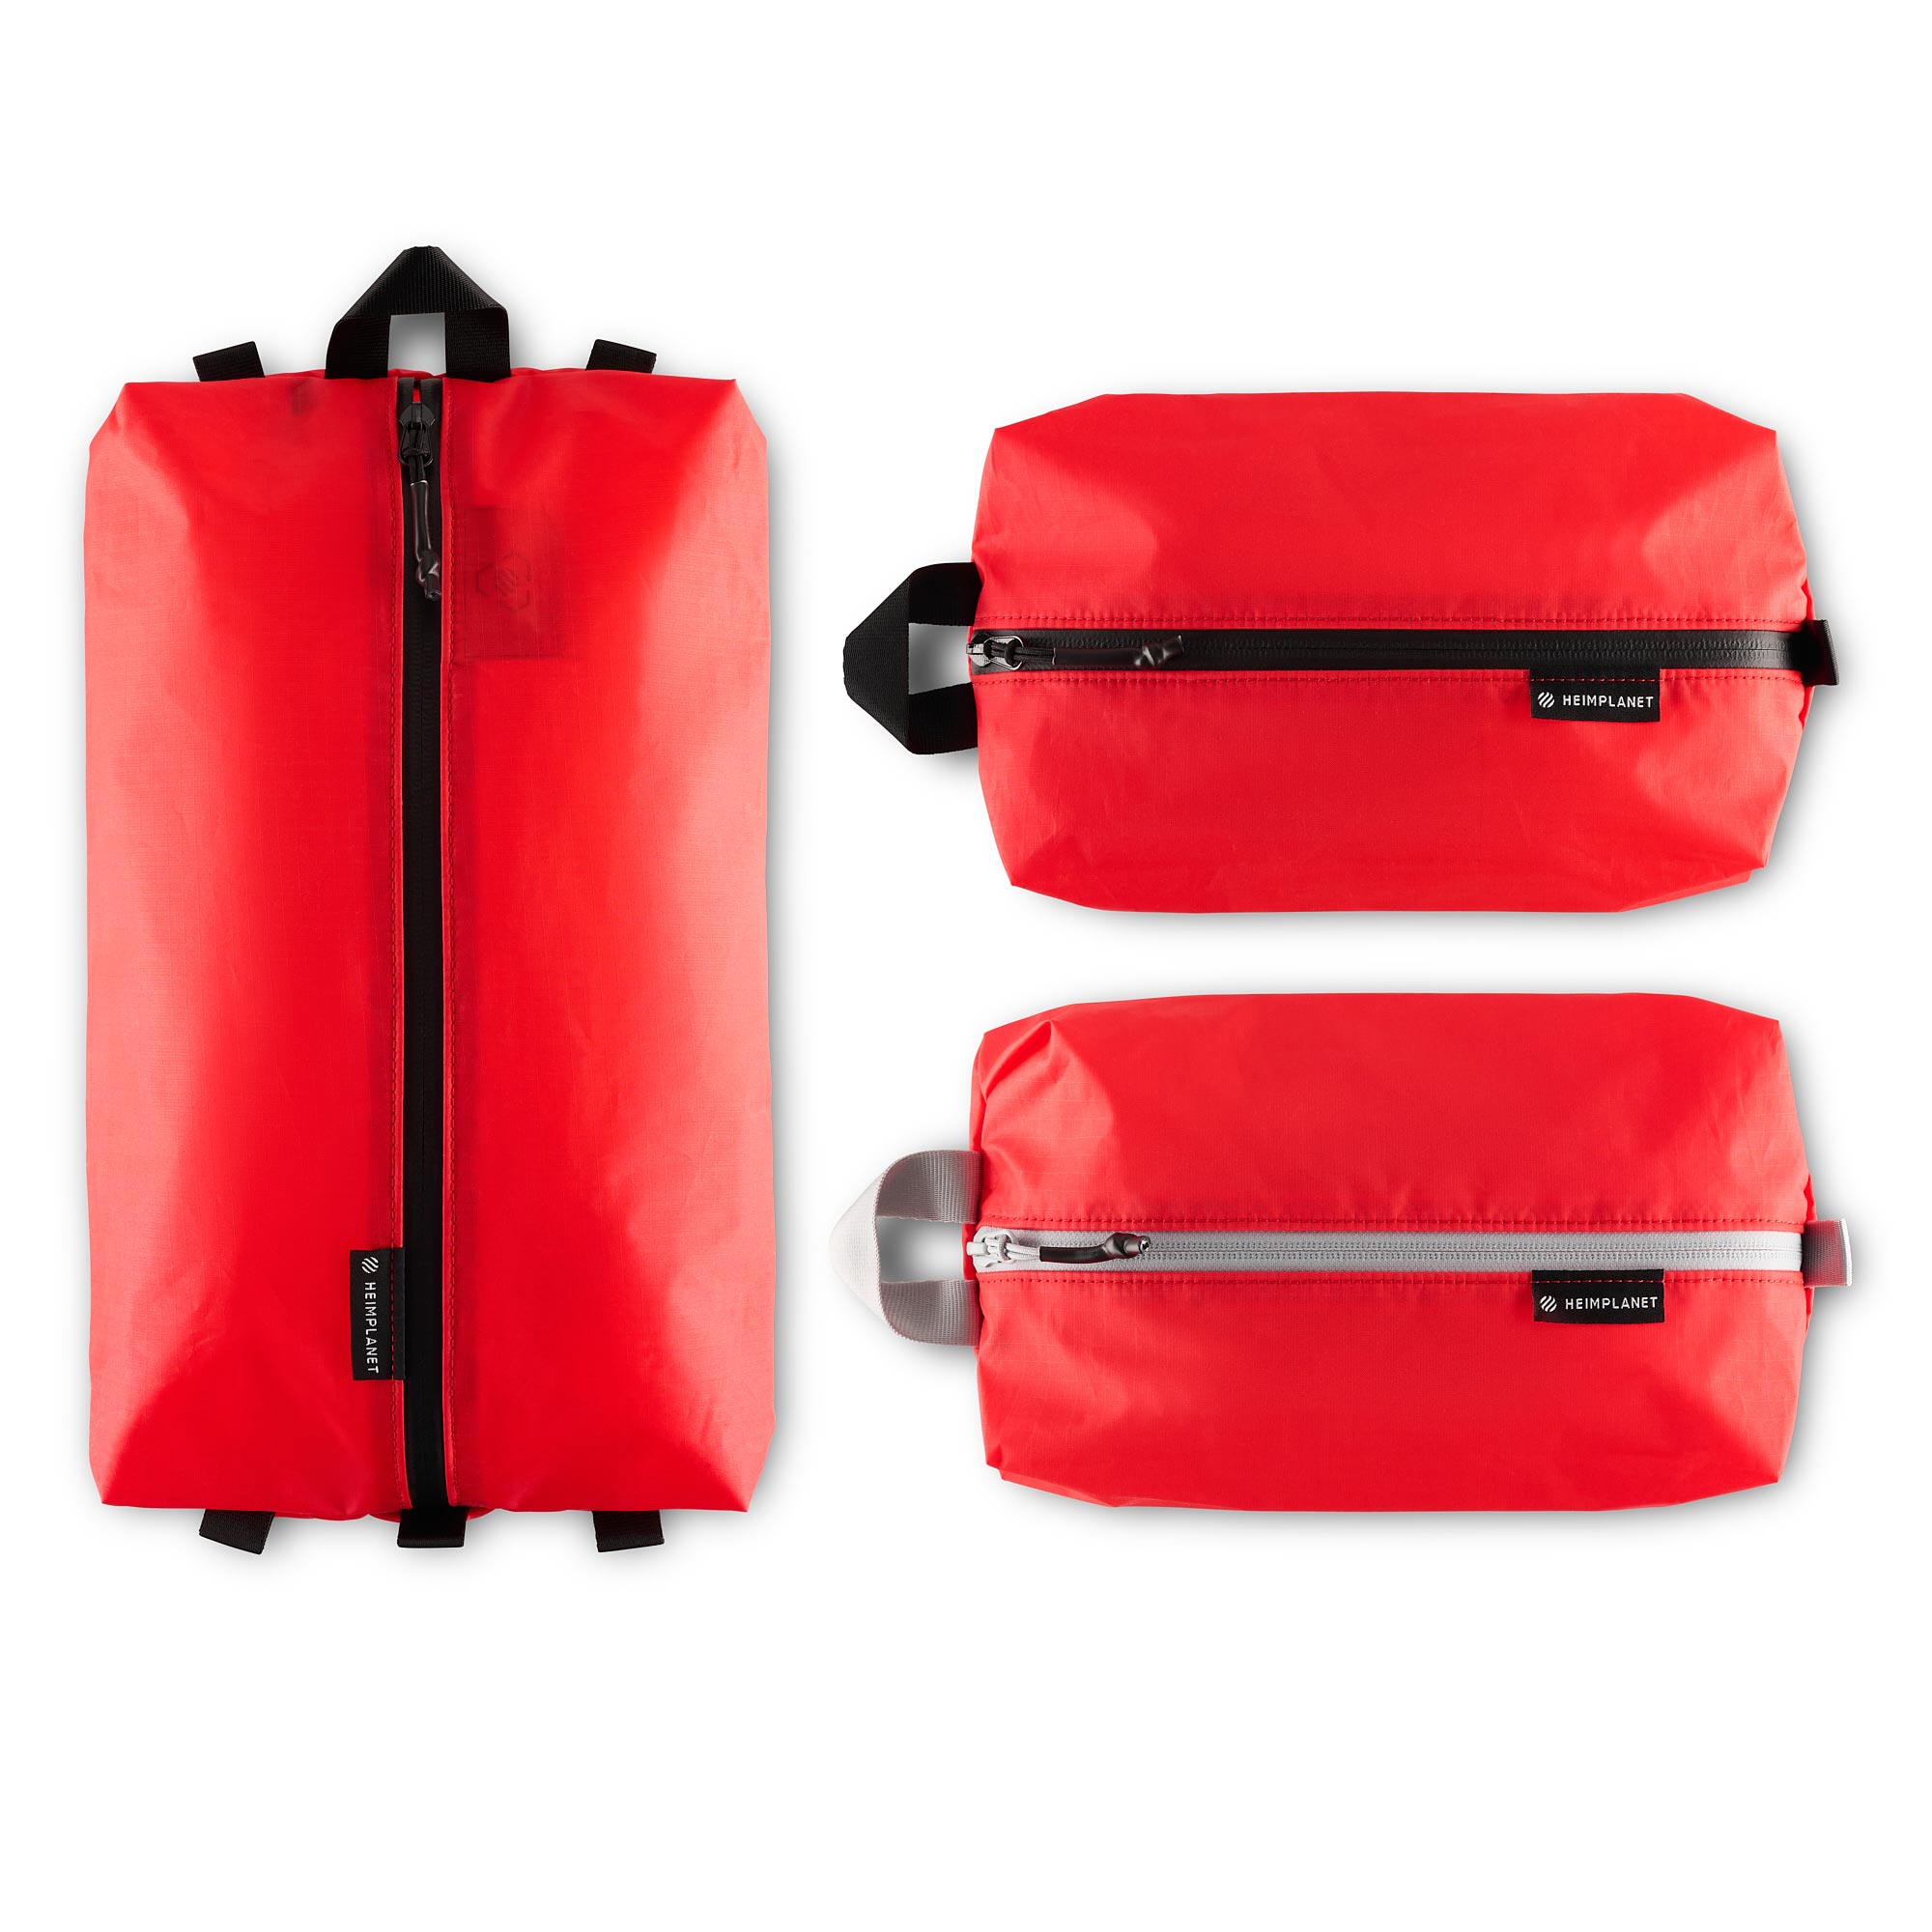 Carry Essentials Packing Cubes, Re-Store Edition